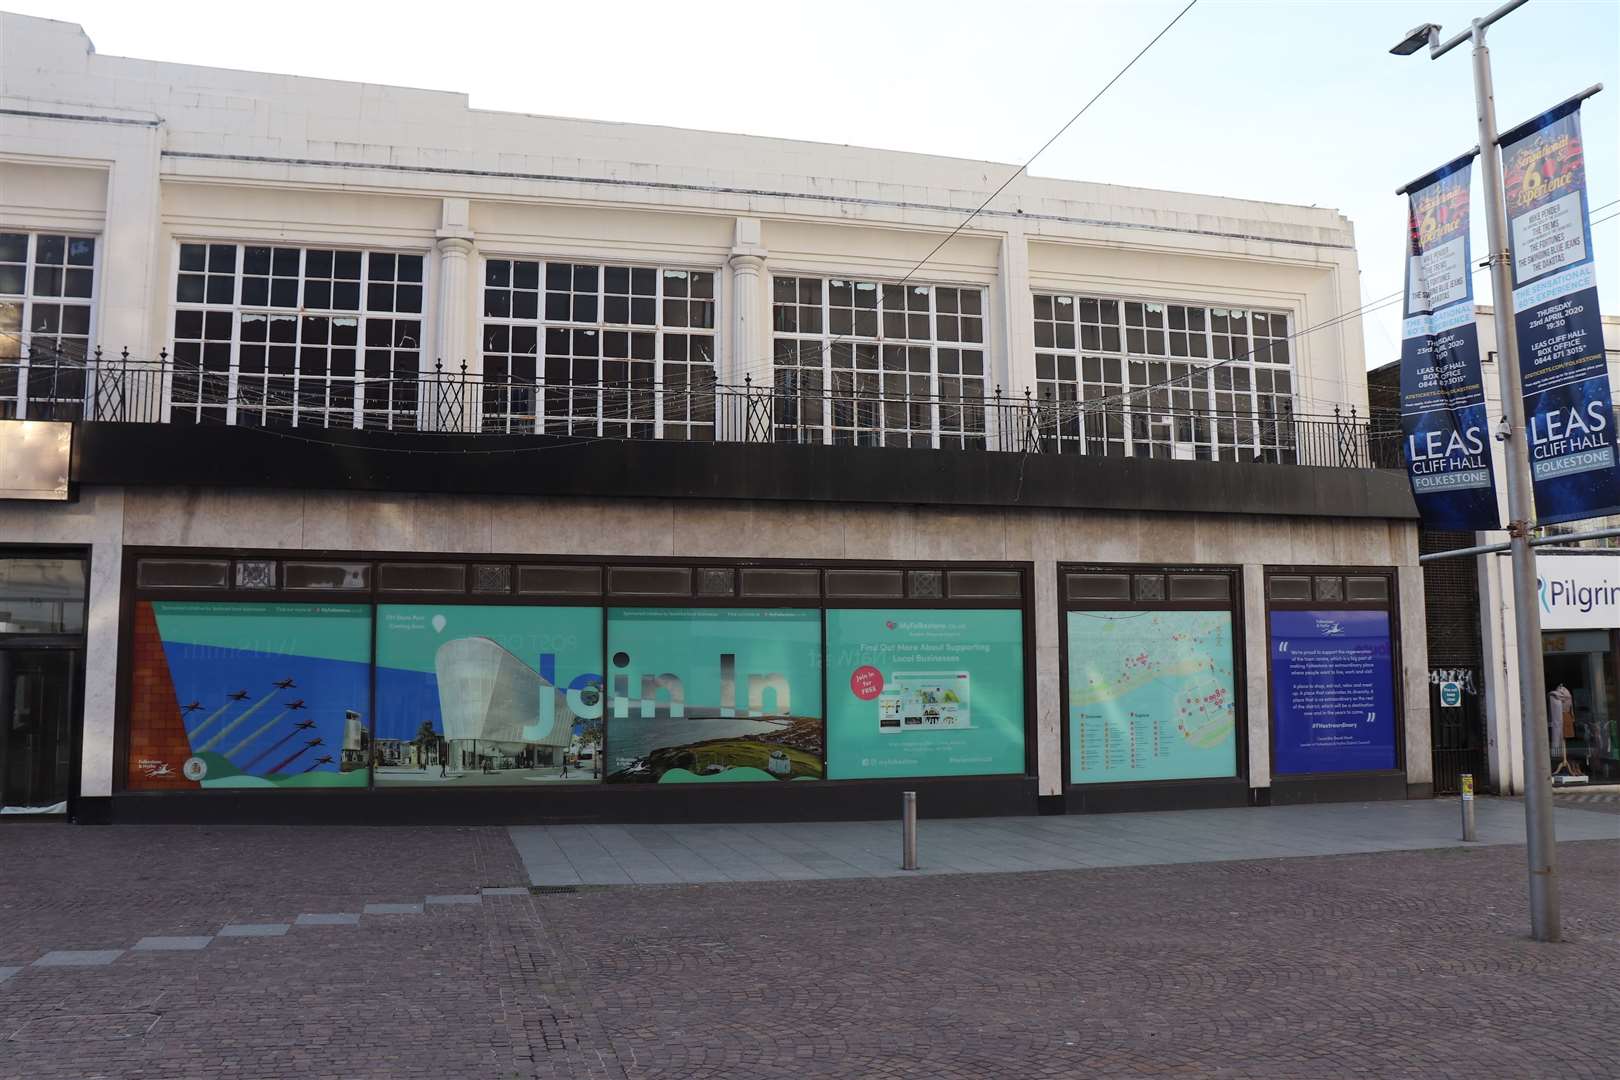 The first panels of the new vinyl window display at Folkestone's former Debenhams store have been installed